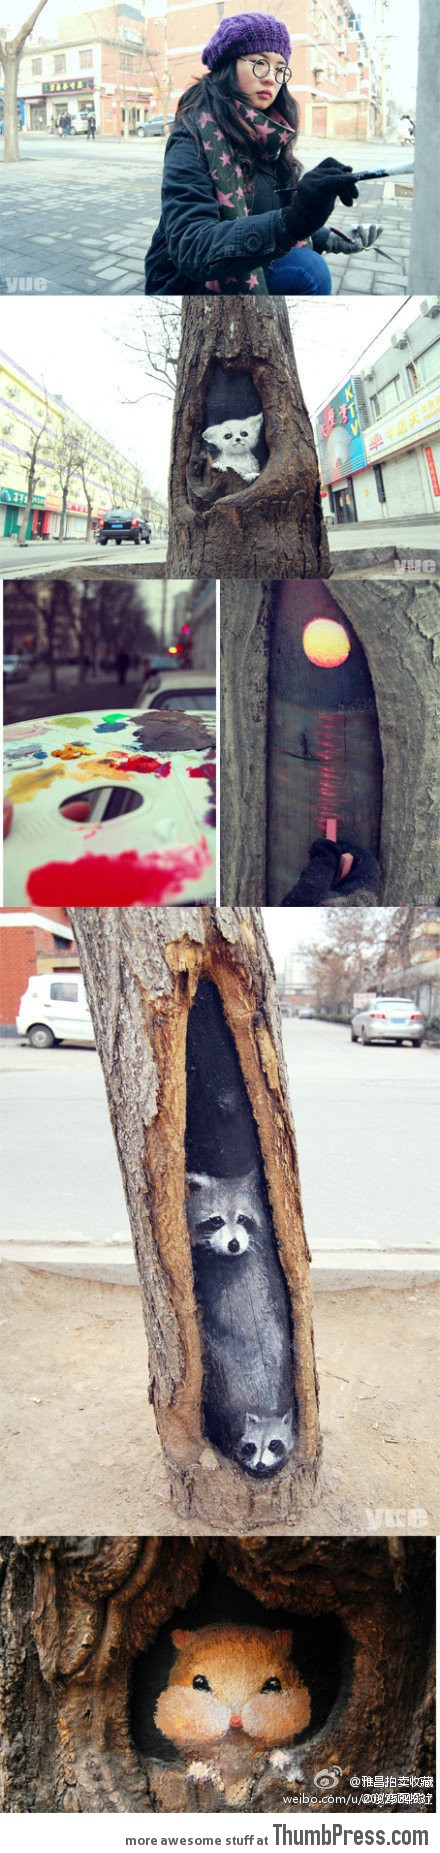 Talent girl turns tree holes into lovely views with her paintbrush